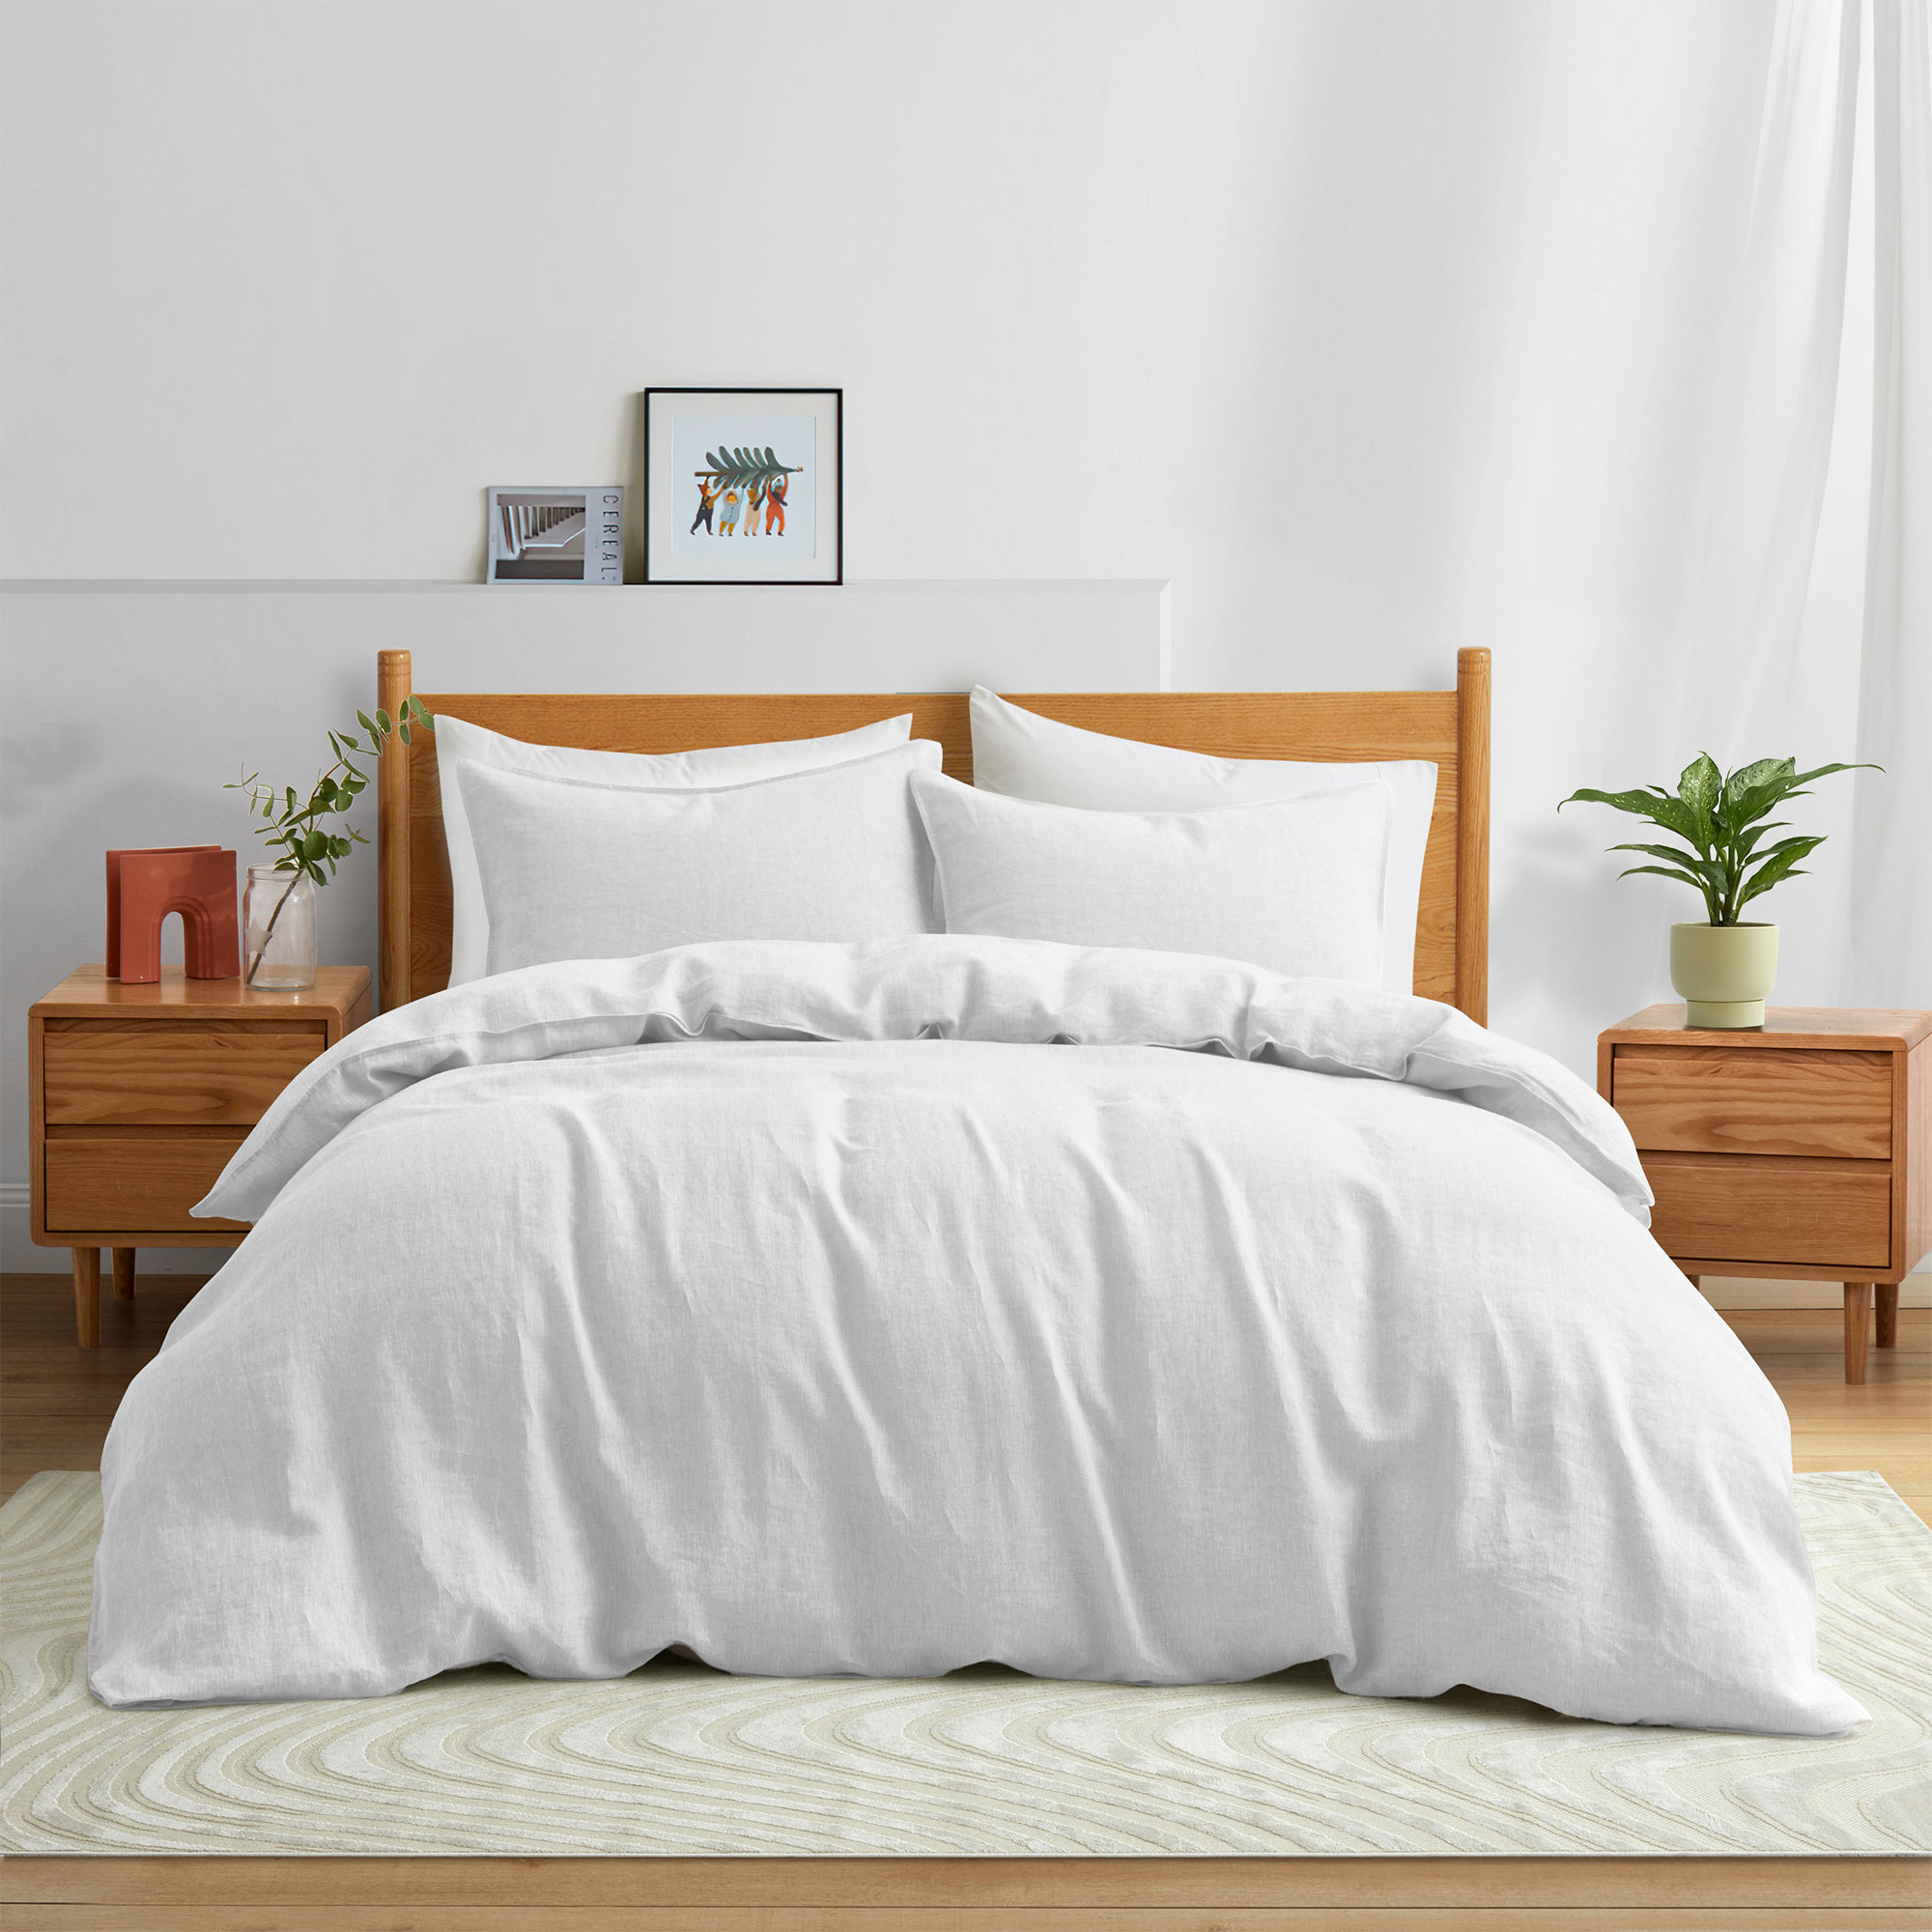 Premium Flax Linen Duvet Cover Set With Pillowcases Moisture Wicking And Breathable - White, Twin